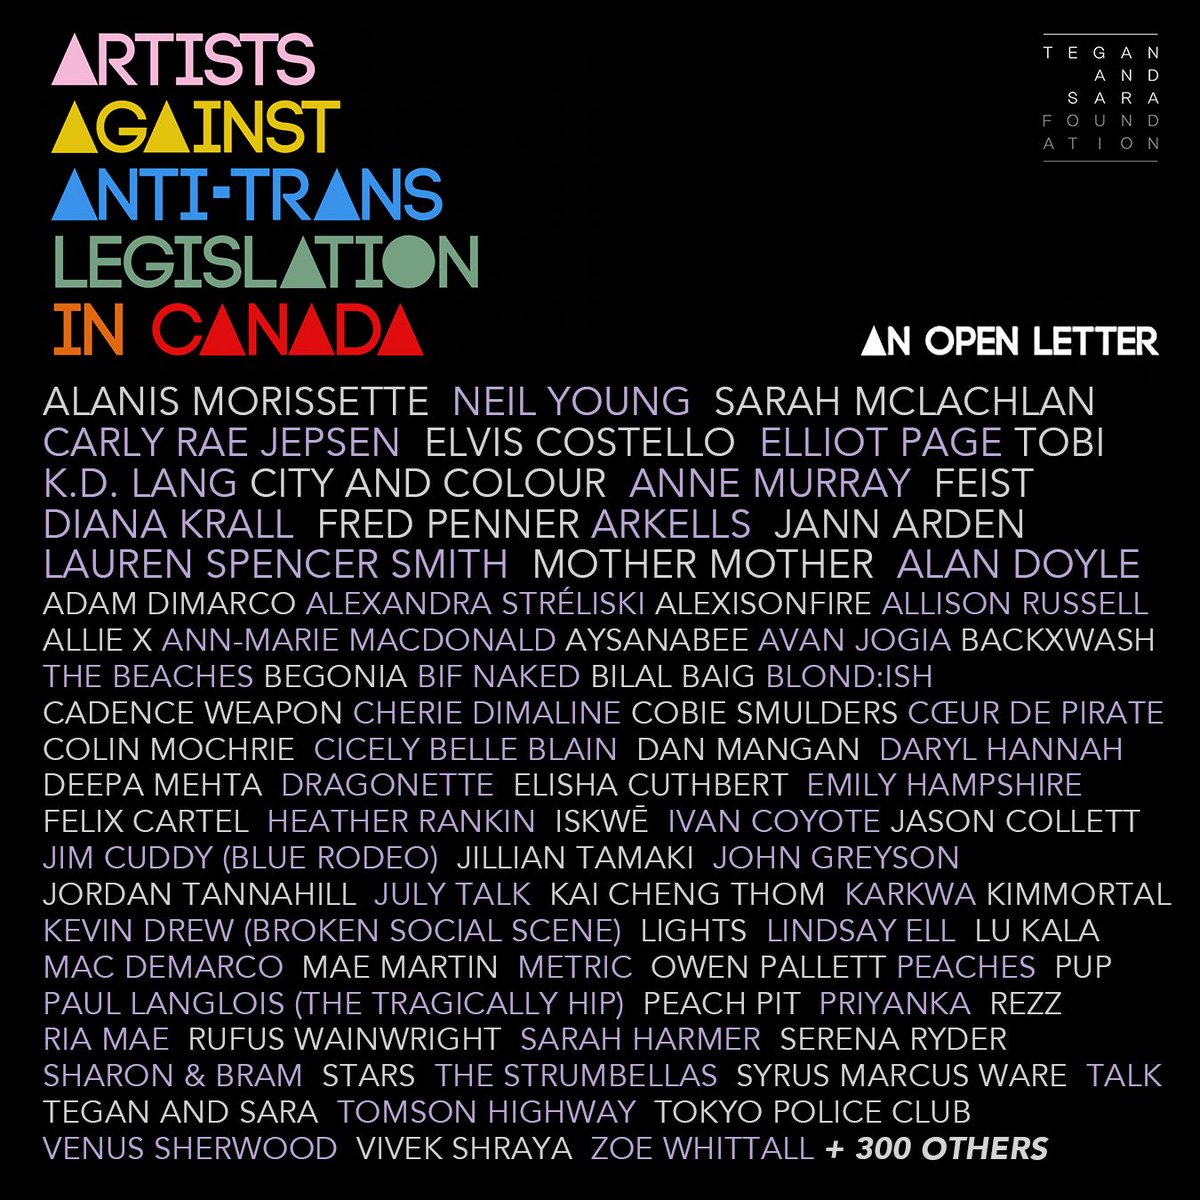 Tegan and Sara Foundation Launches Open Letter: Artists Against Anti-Trans Legislation in Canada. Read It Now: teganandsarafoundation.org/open-letter